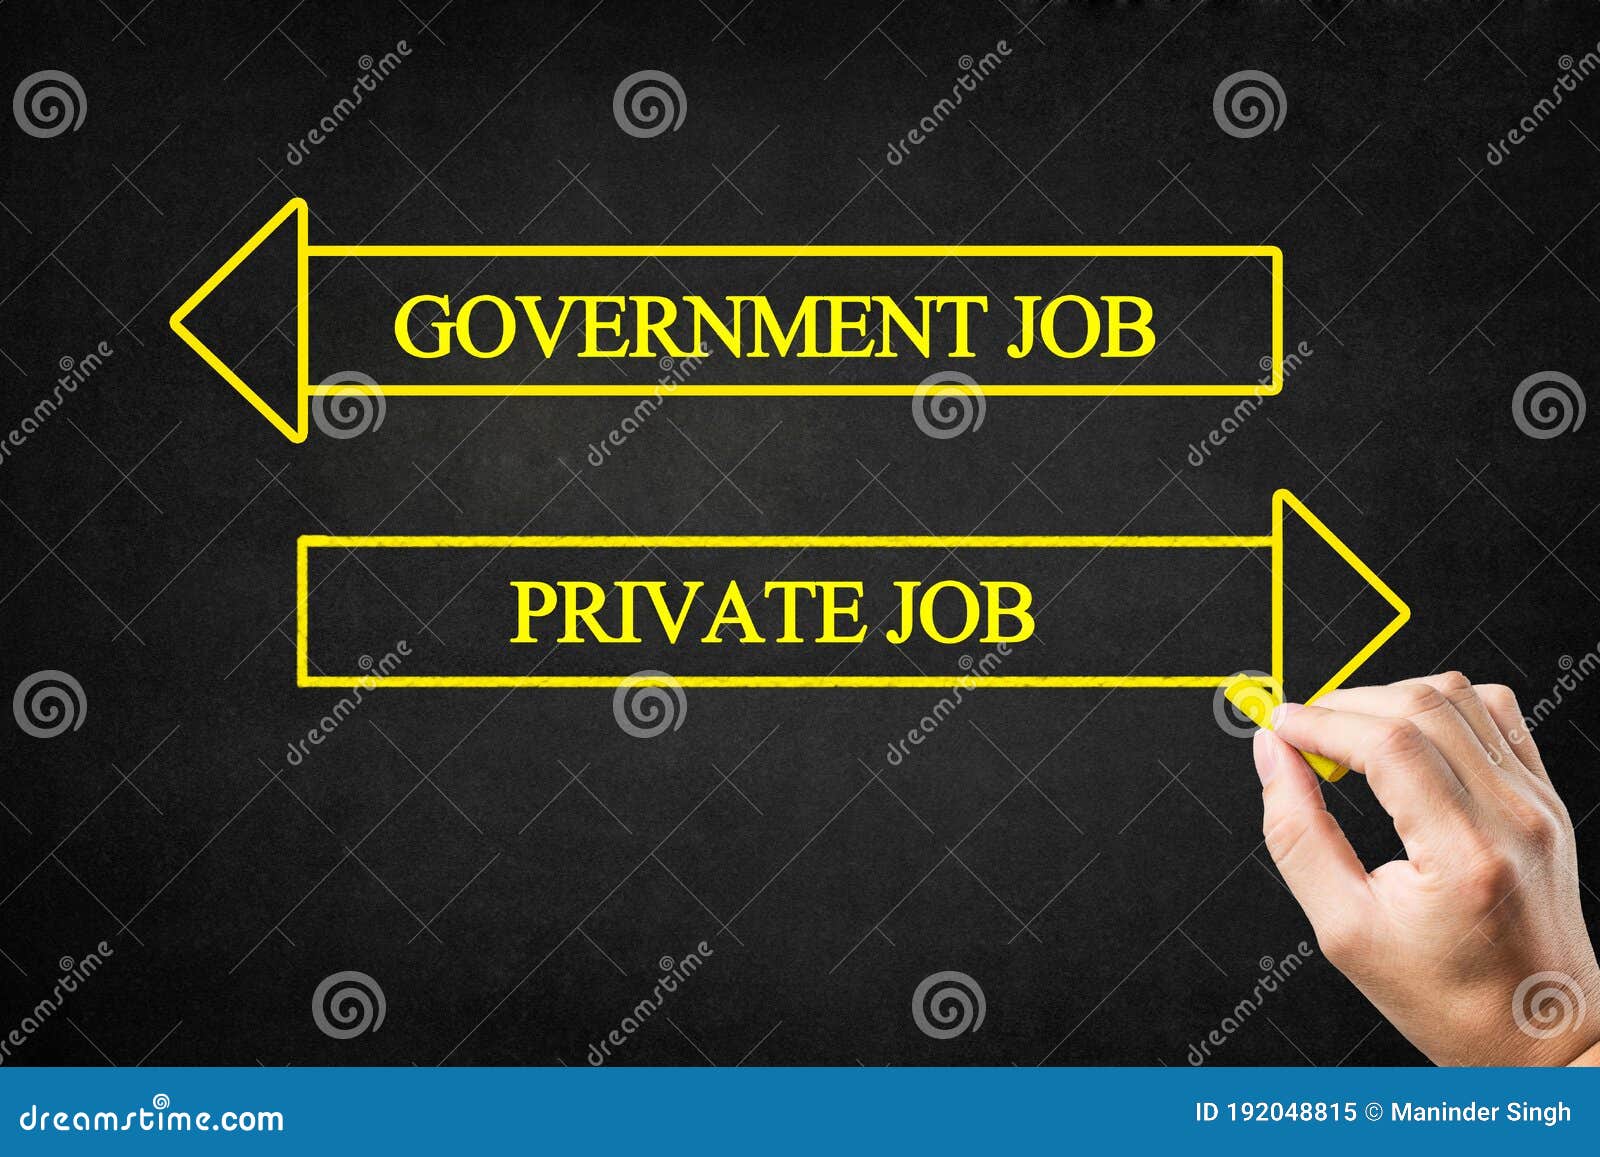 job for me government 2023